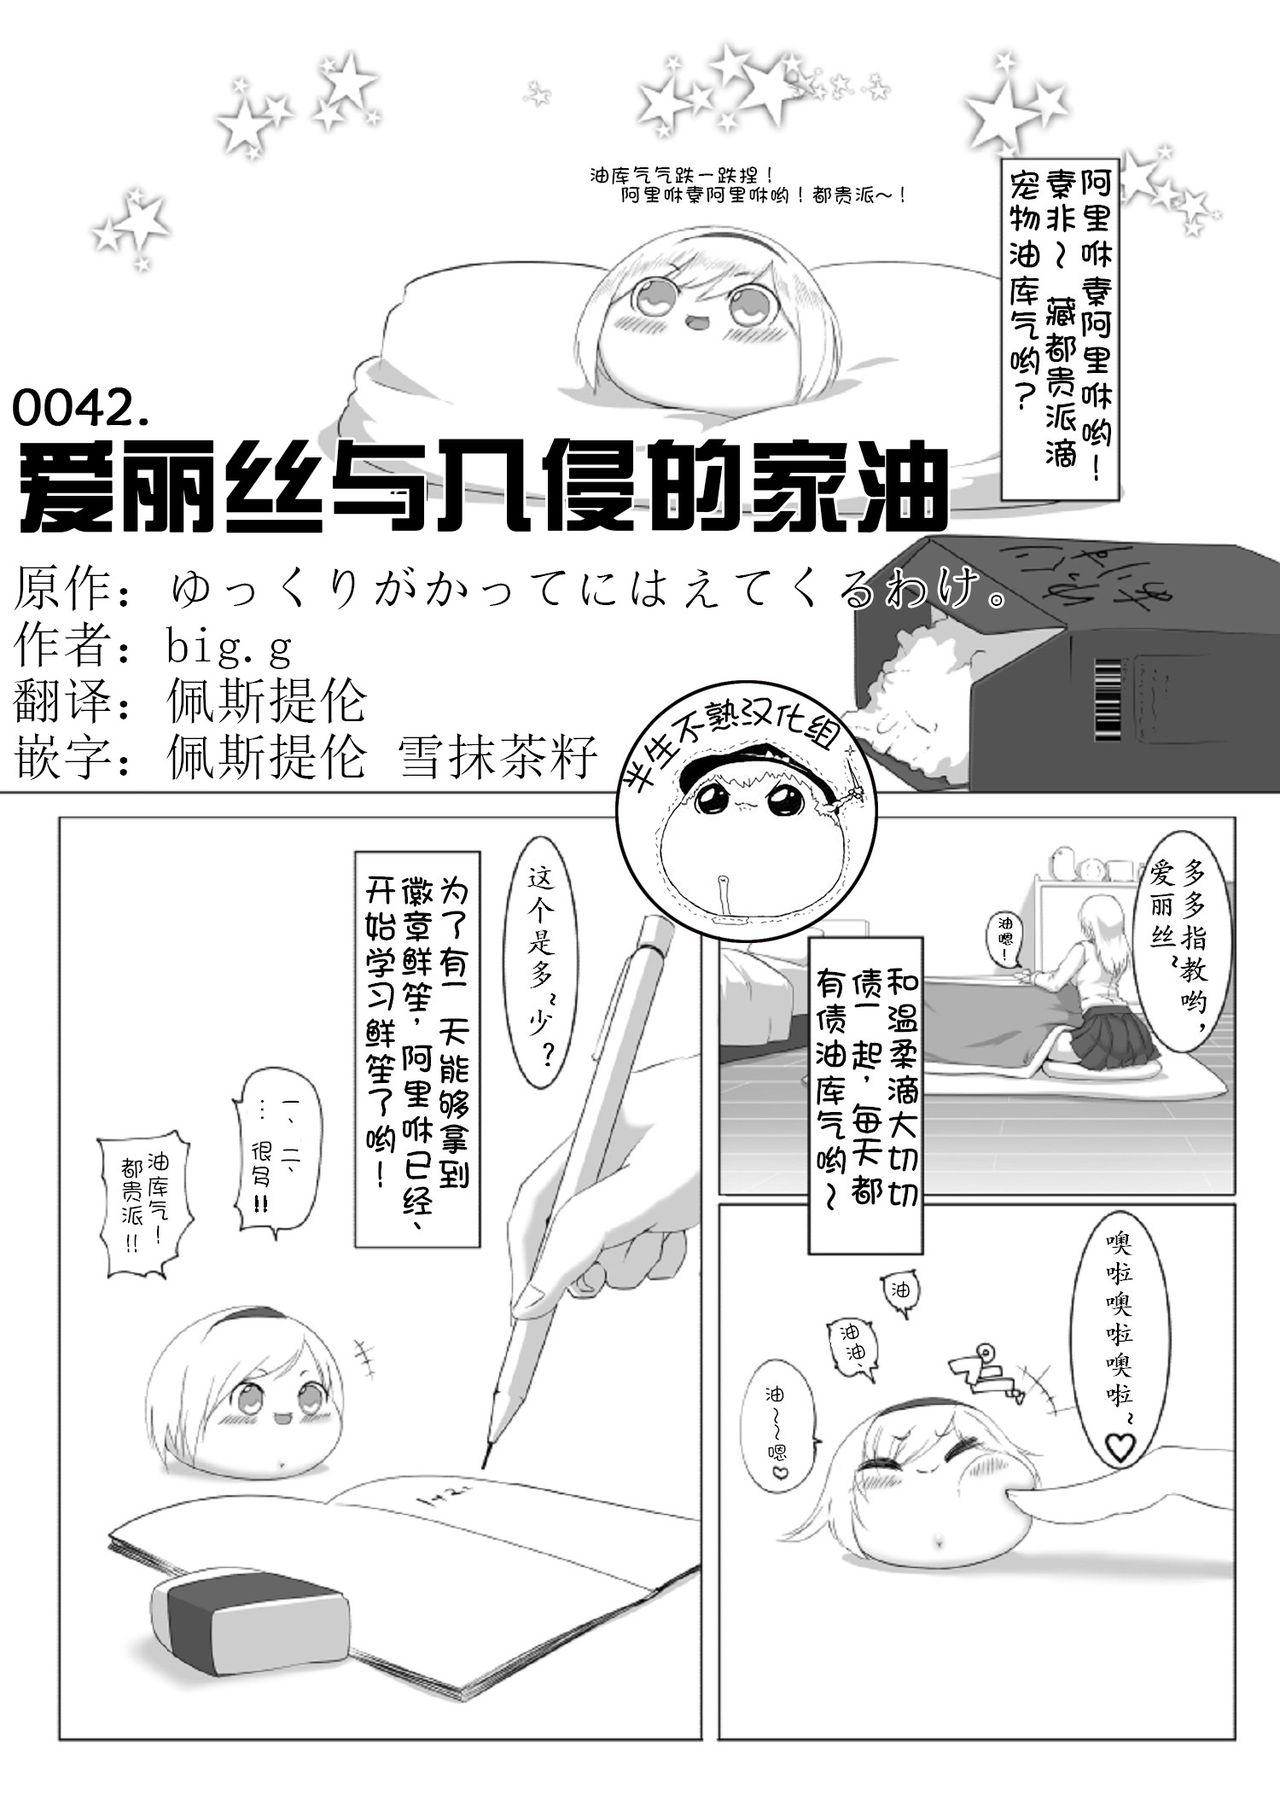 Camshow ゆっくりがかってにはえてくるわけ（Chinese) - Touhou project Amateur Pussy - Picture 1